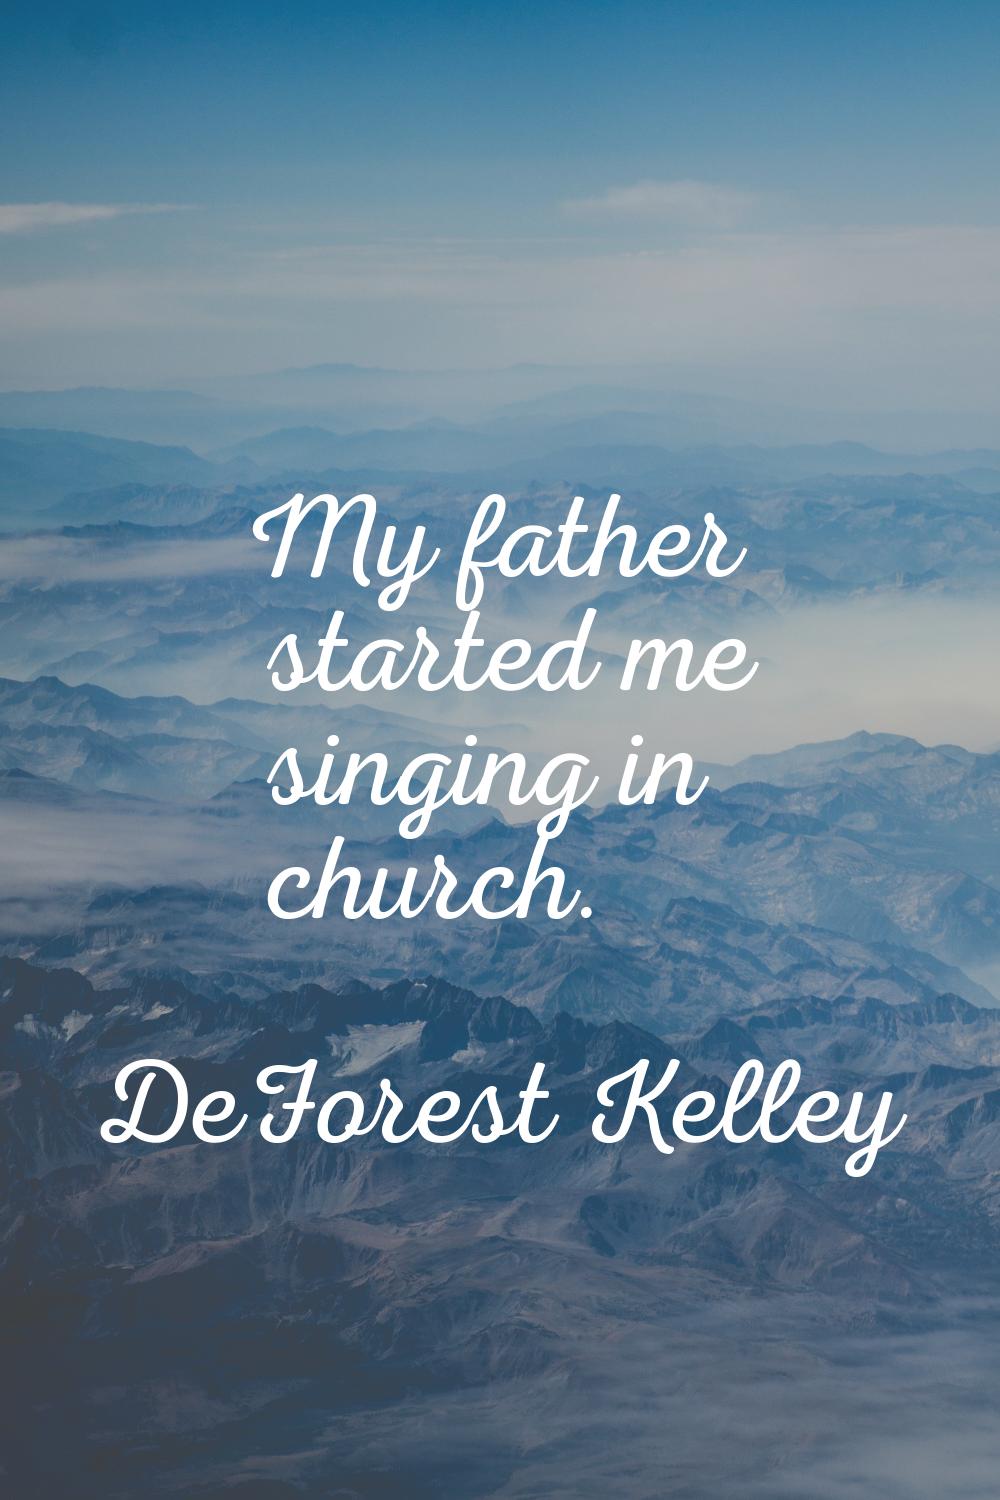 My father started me singing in church.